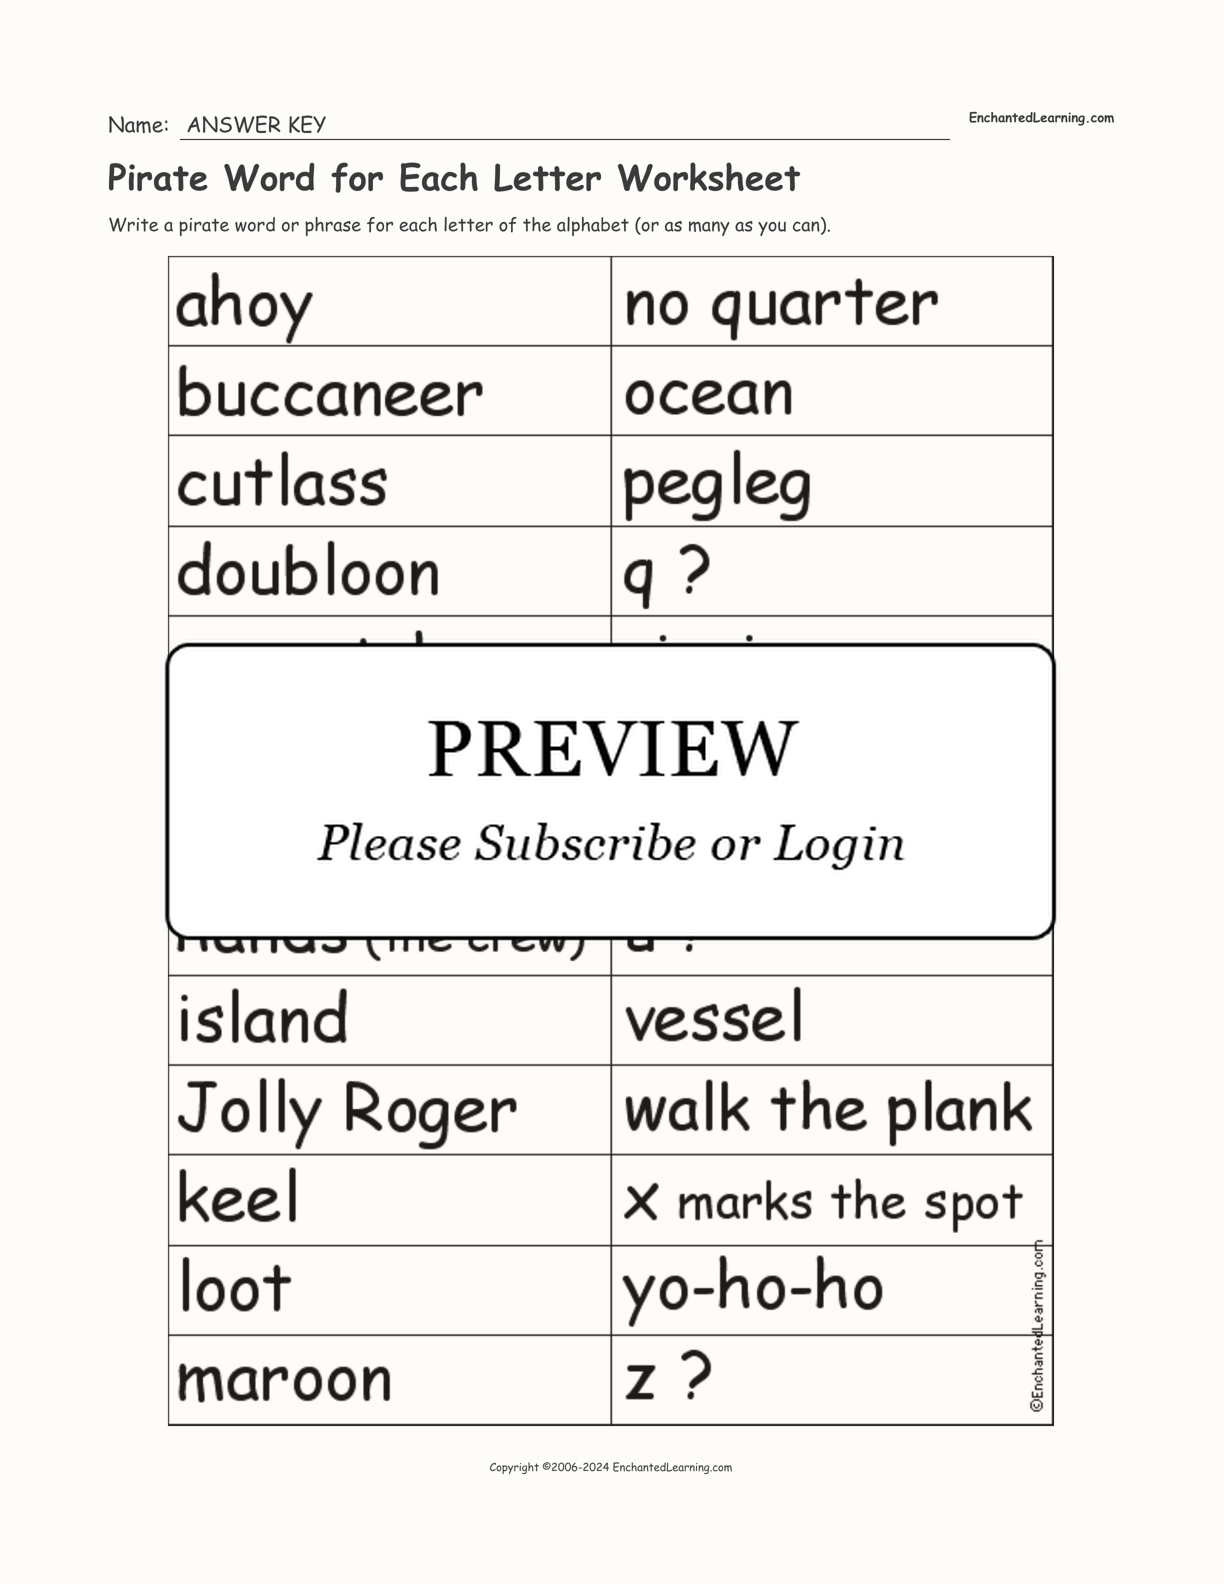 Pirate Word for Each Letter Worksheet interactive worksheet page 2